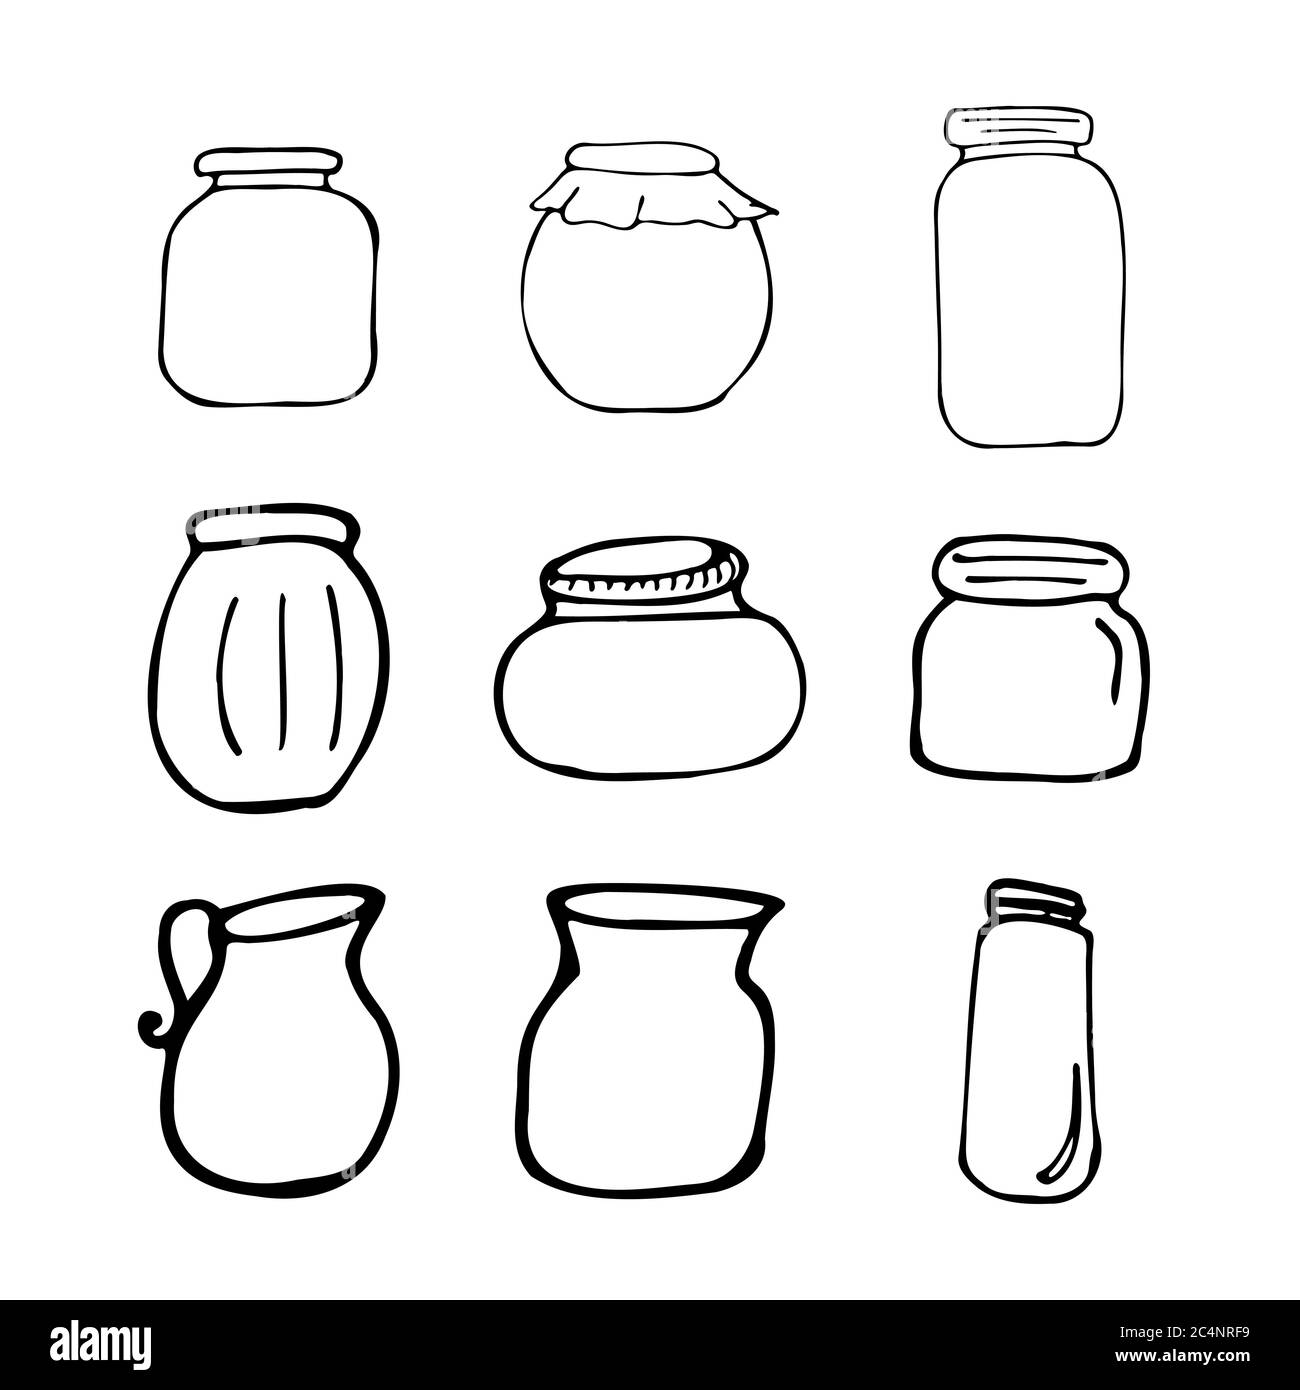 Hand drawn jar set. Contour sketch. Kitchen objects doodle style. Vector illustration isolated on white background. Alchemy and vintage. Stock Vector